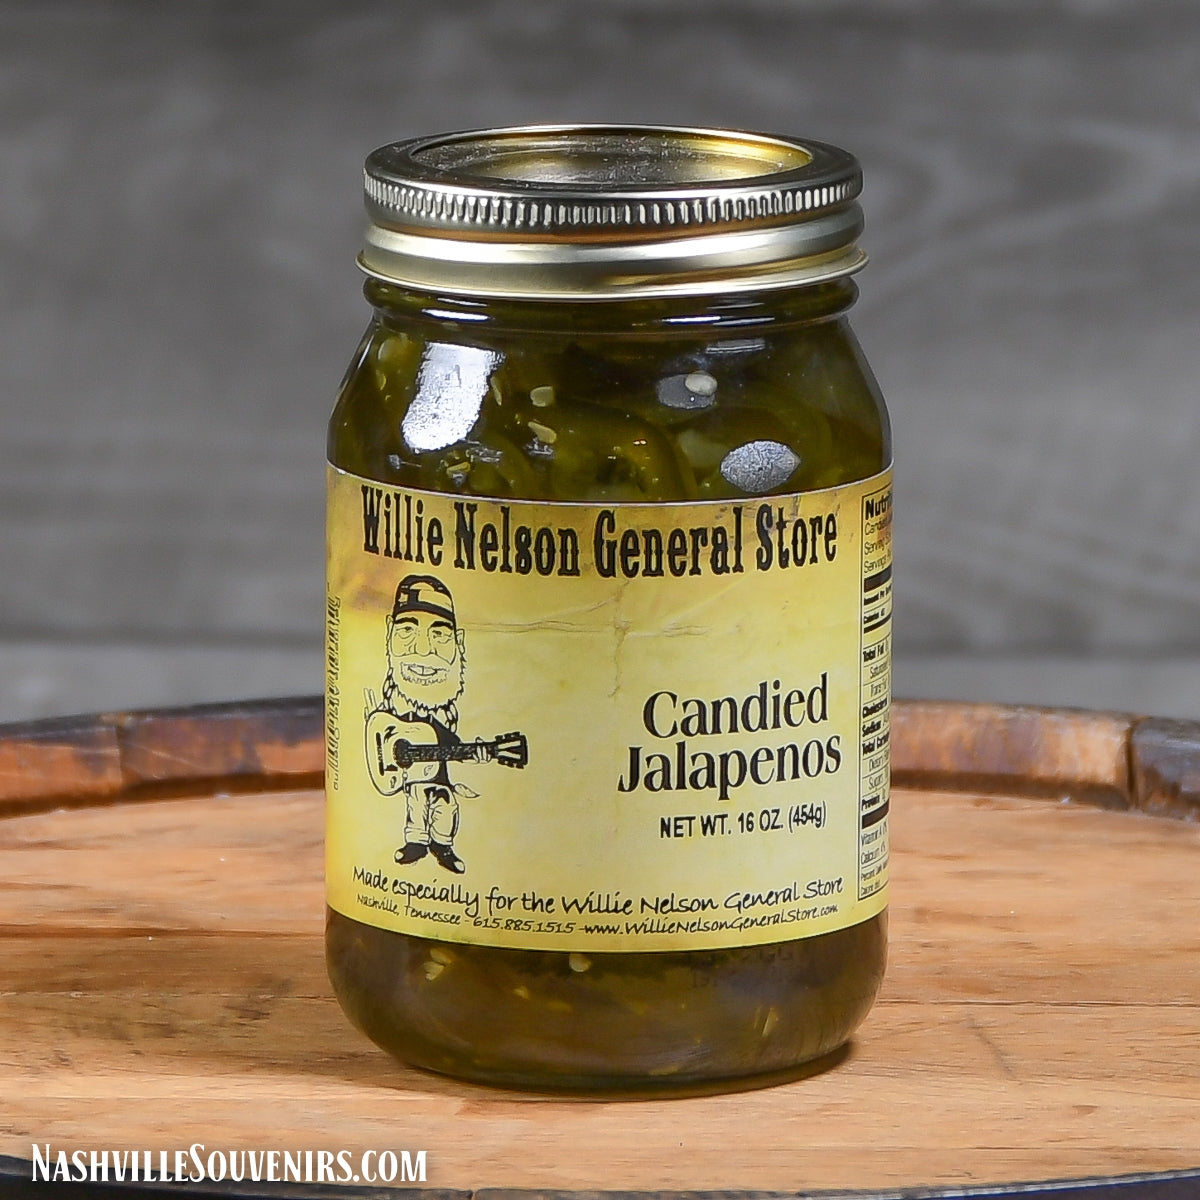 Willie Nelson General Store Candied Jalapenos